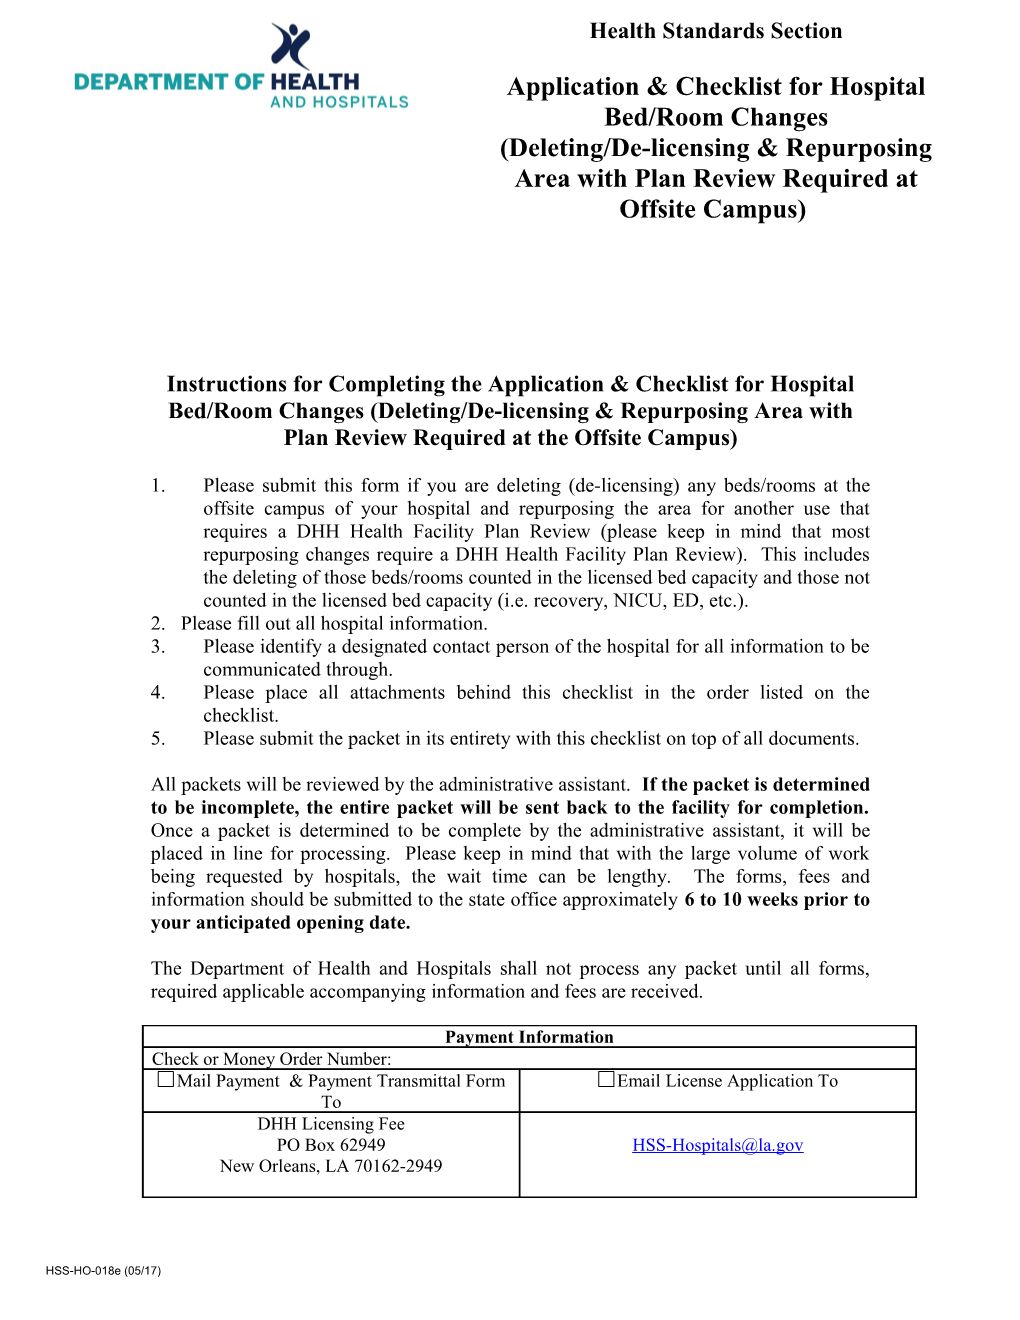 Instructions for Completing the Application & Checklist for Hospital Bed/Room Changes s3